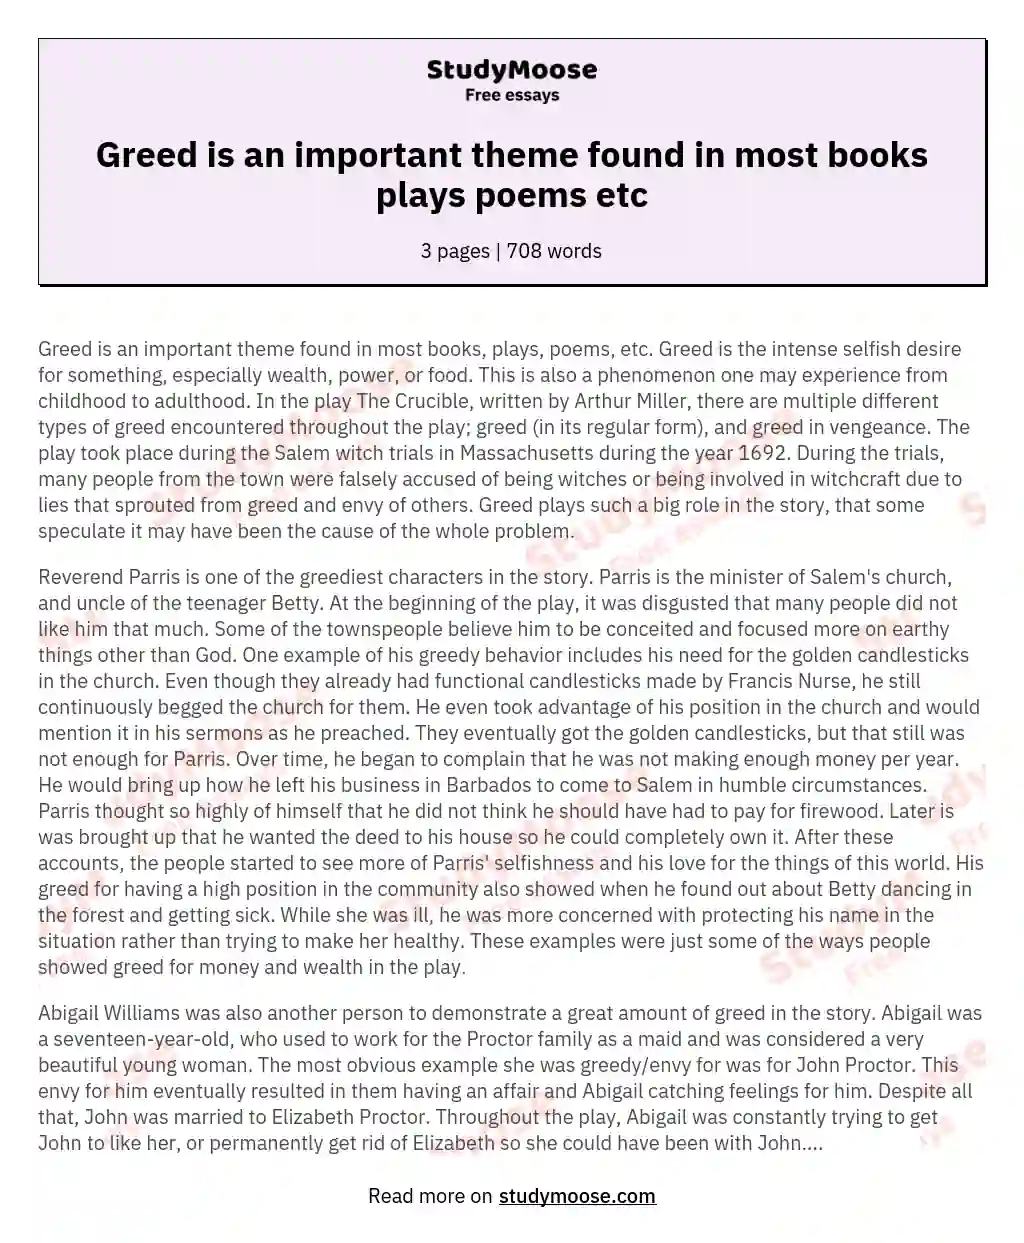 Greed is an important theme found in most books plays poems etc essay